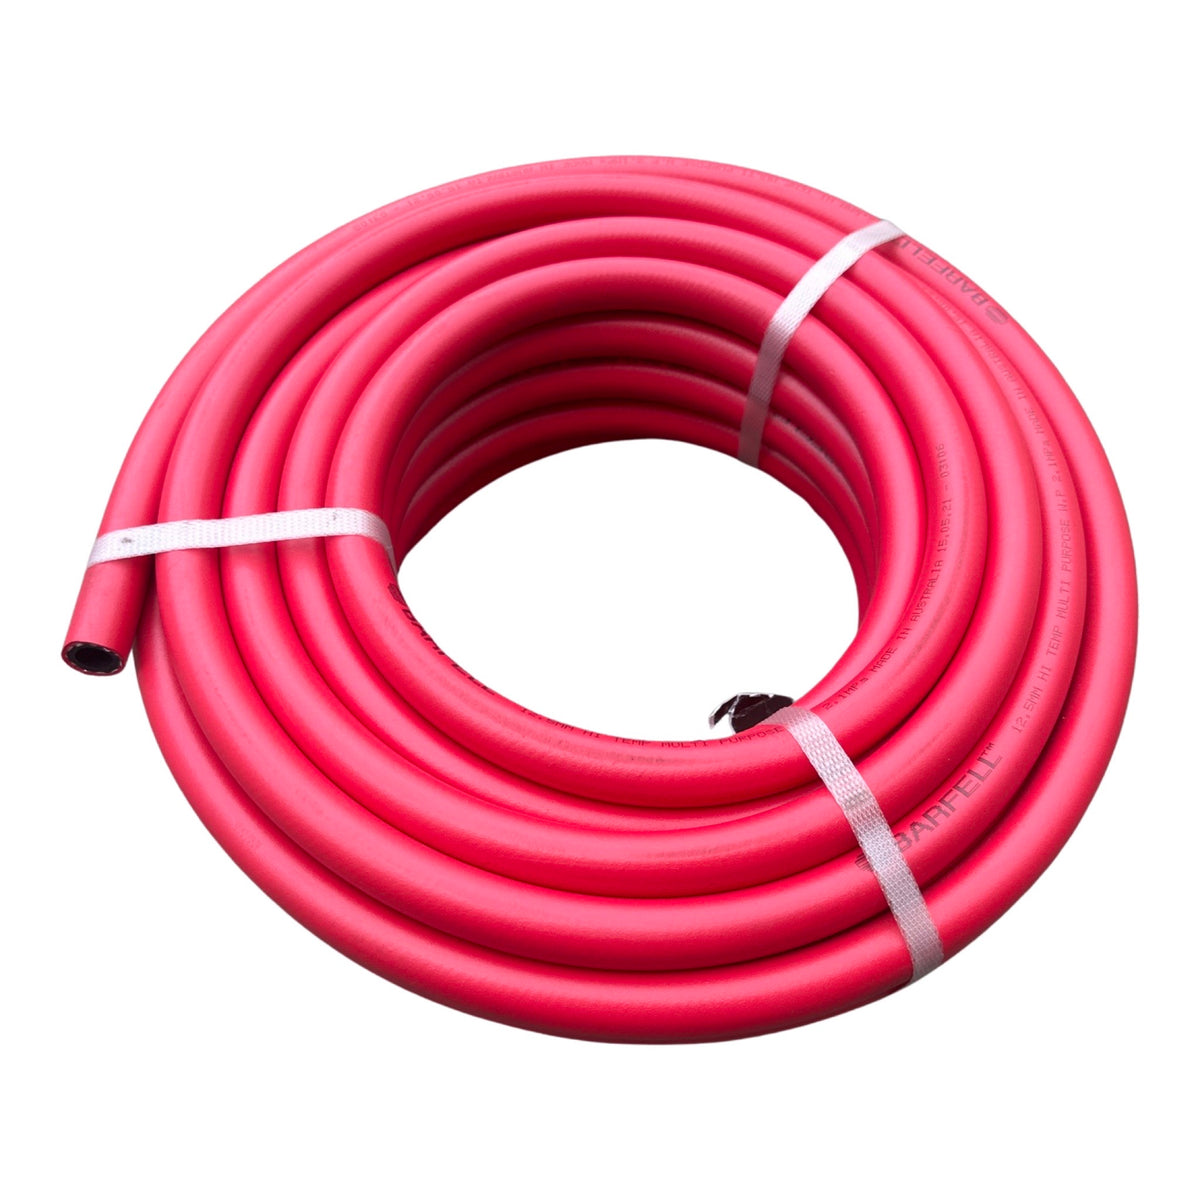 BARFELL High Temperature Hose w Crimped Stainless Steel Fittings 12.5mm